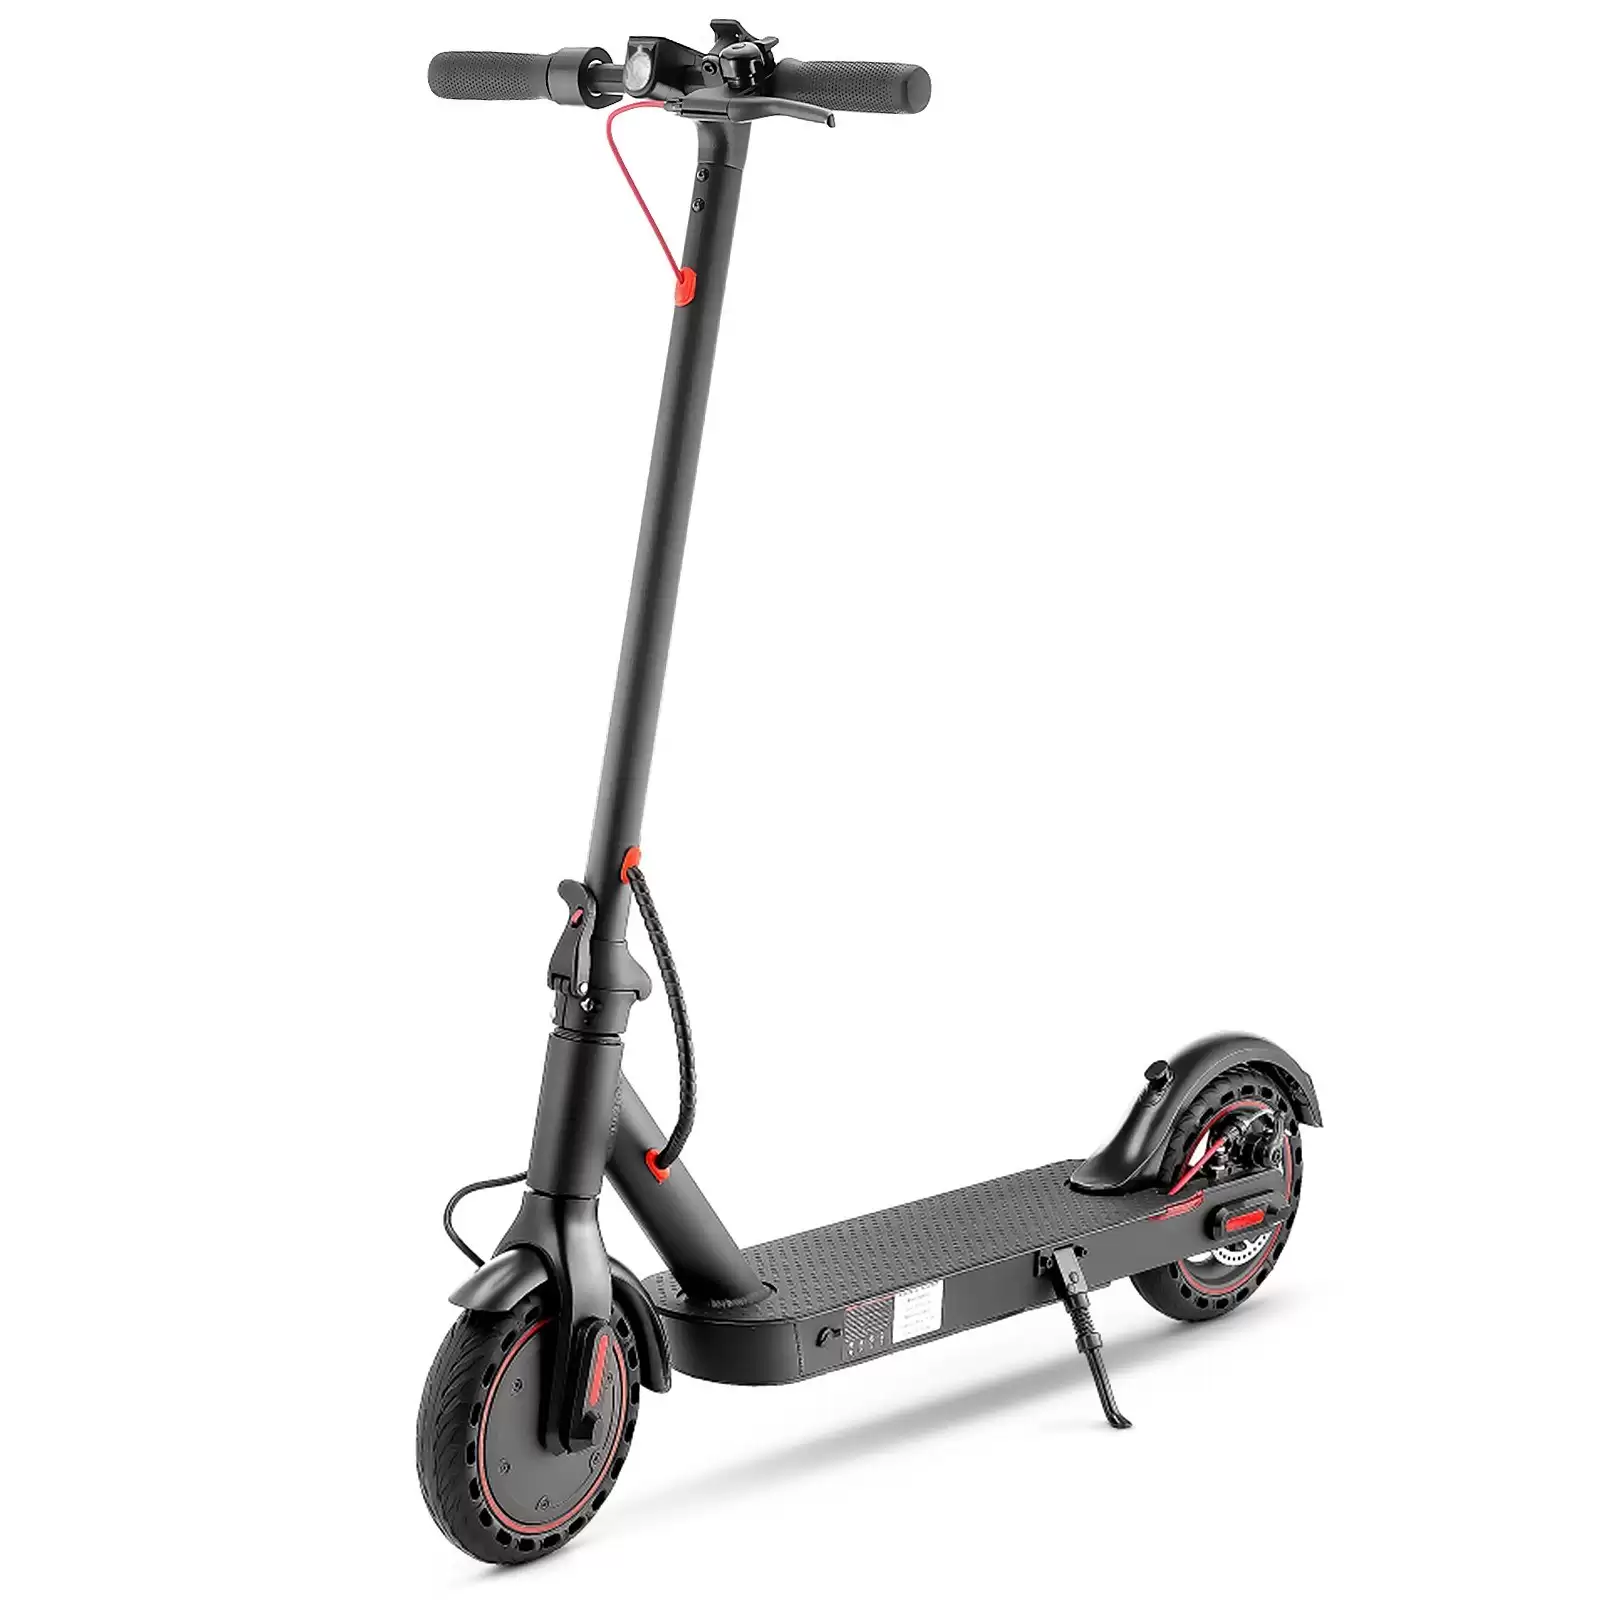 Get Extra $269.61 Discount On E9pro 8.5 Inch Two Wheel Folding Electric Scooter, Limited Offers $316.99 At Tomtop